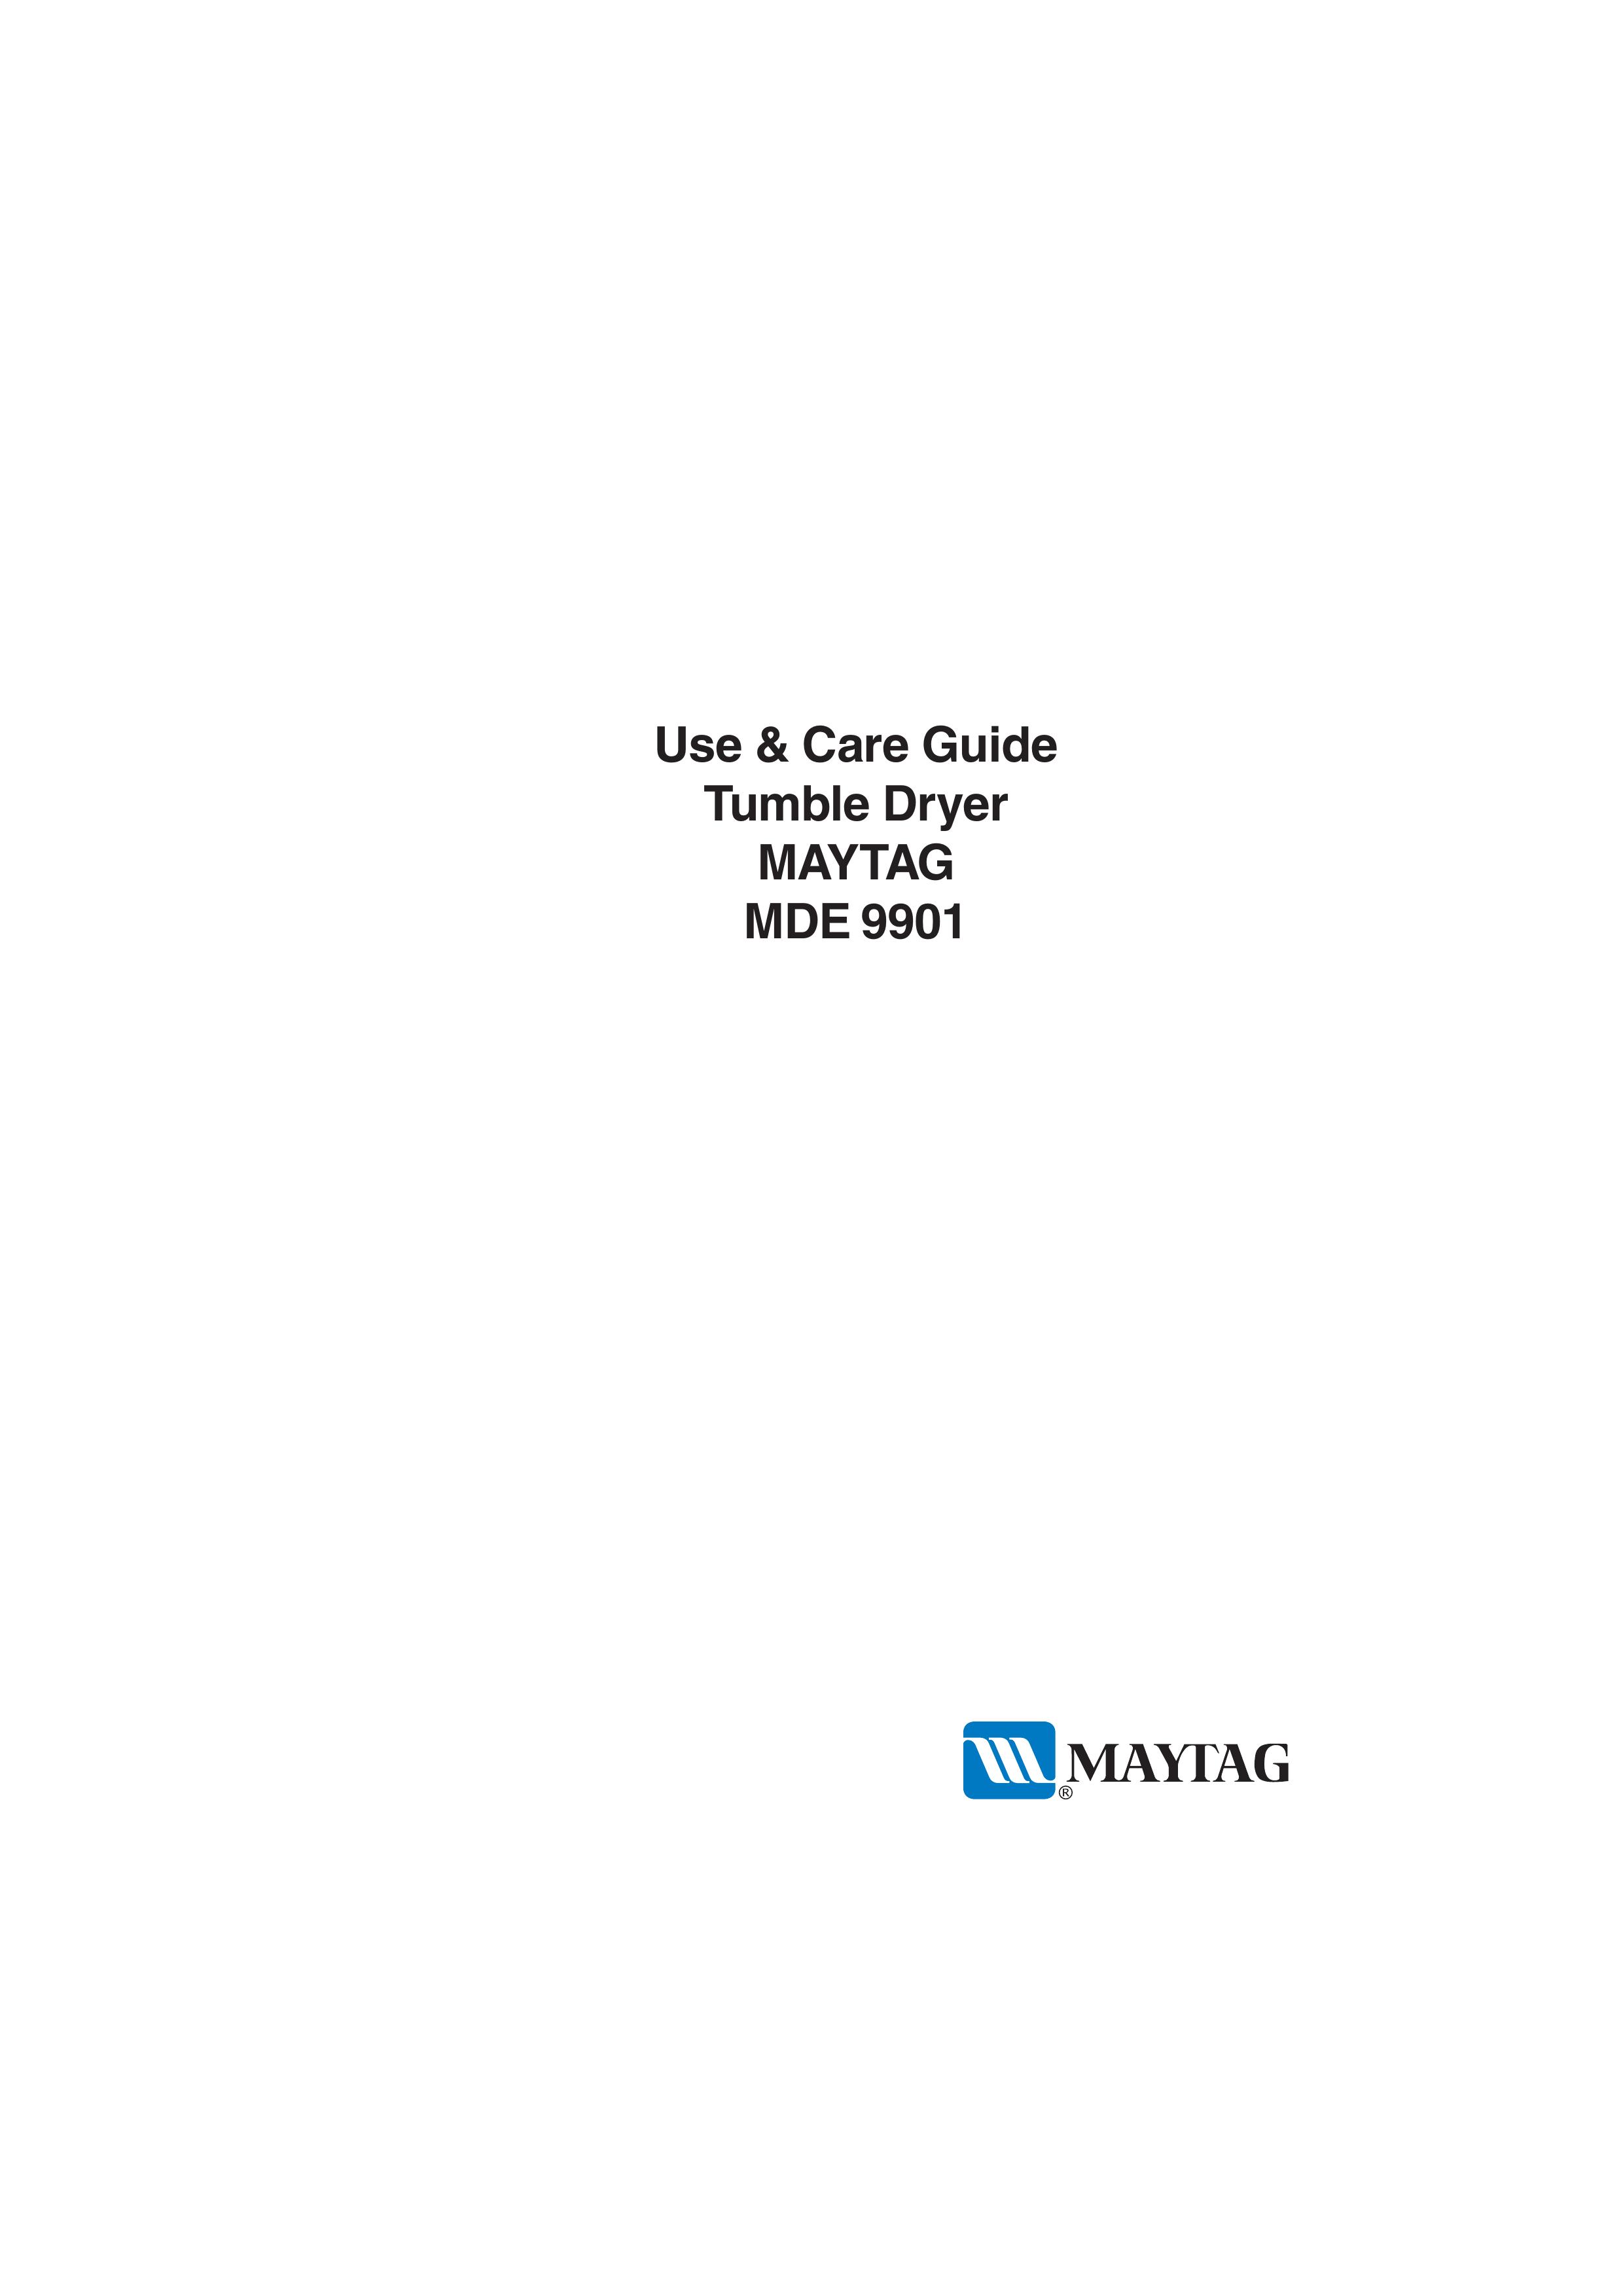 Maytag MDE 9901 Clothes Dryer User Manual